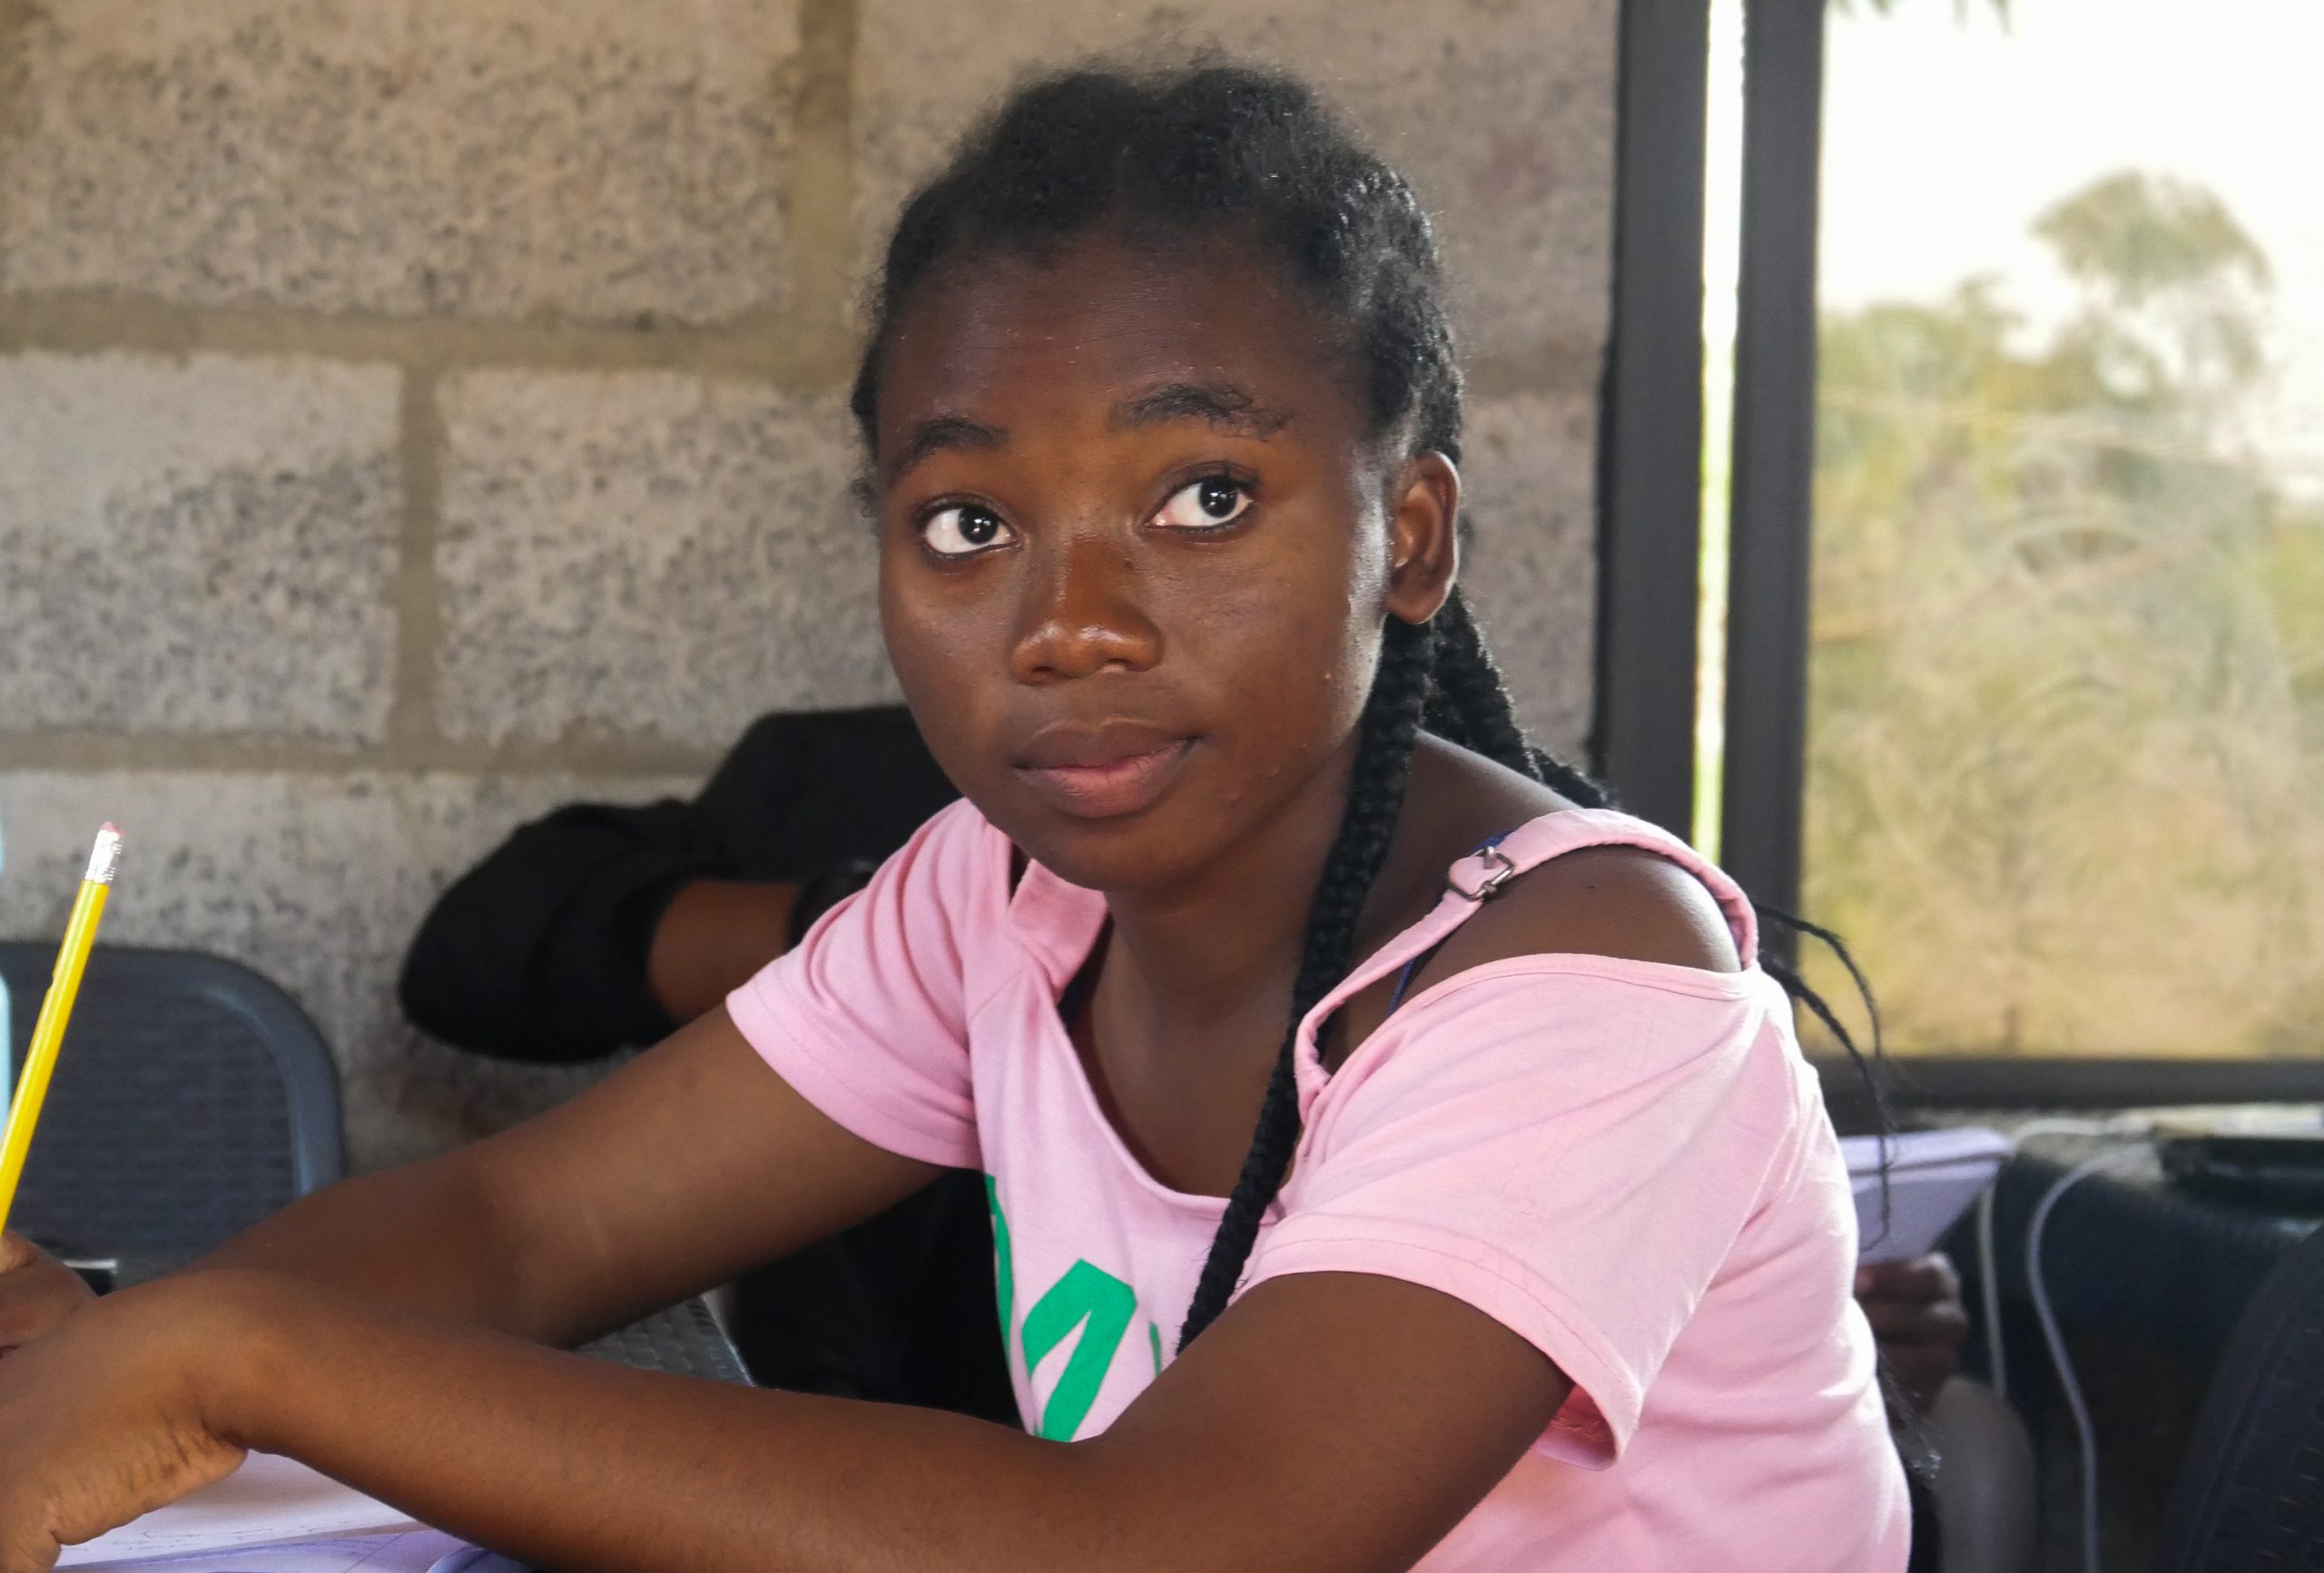 Mercy, a female student wearing a pink top sits at a desk with a notebook. She is looking just past the camera.